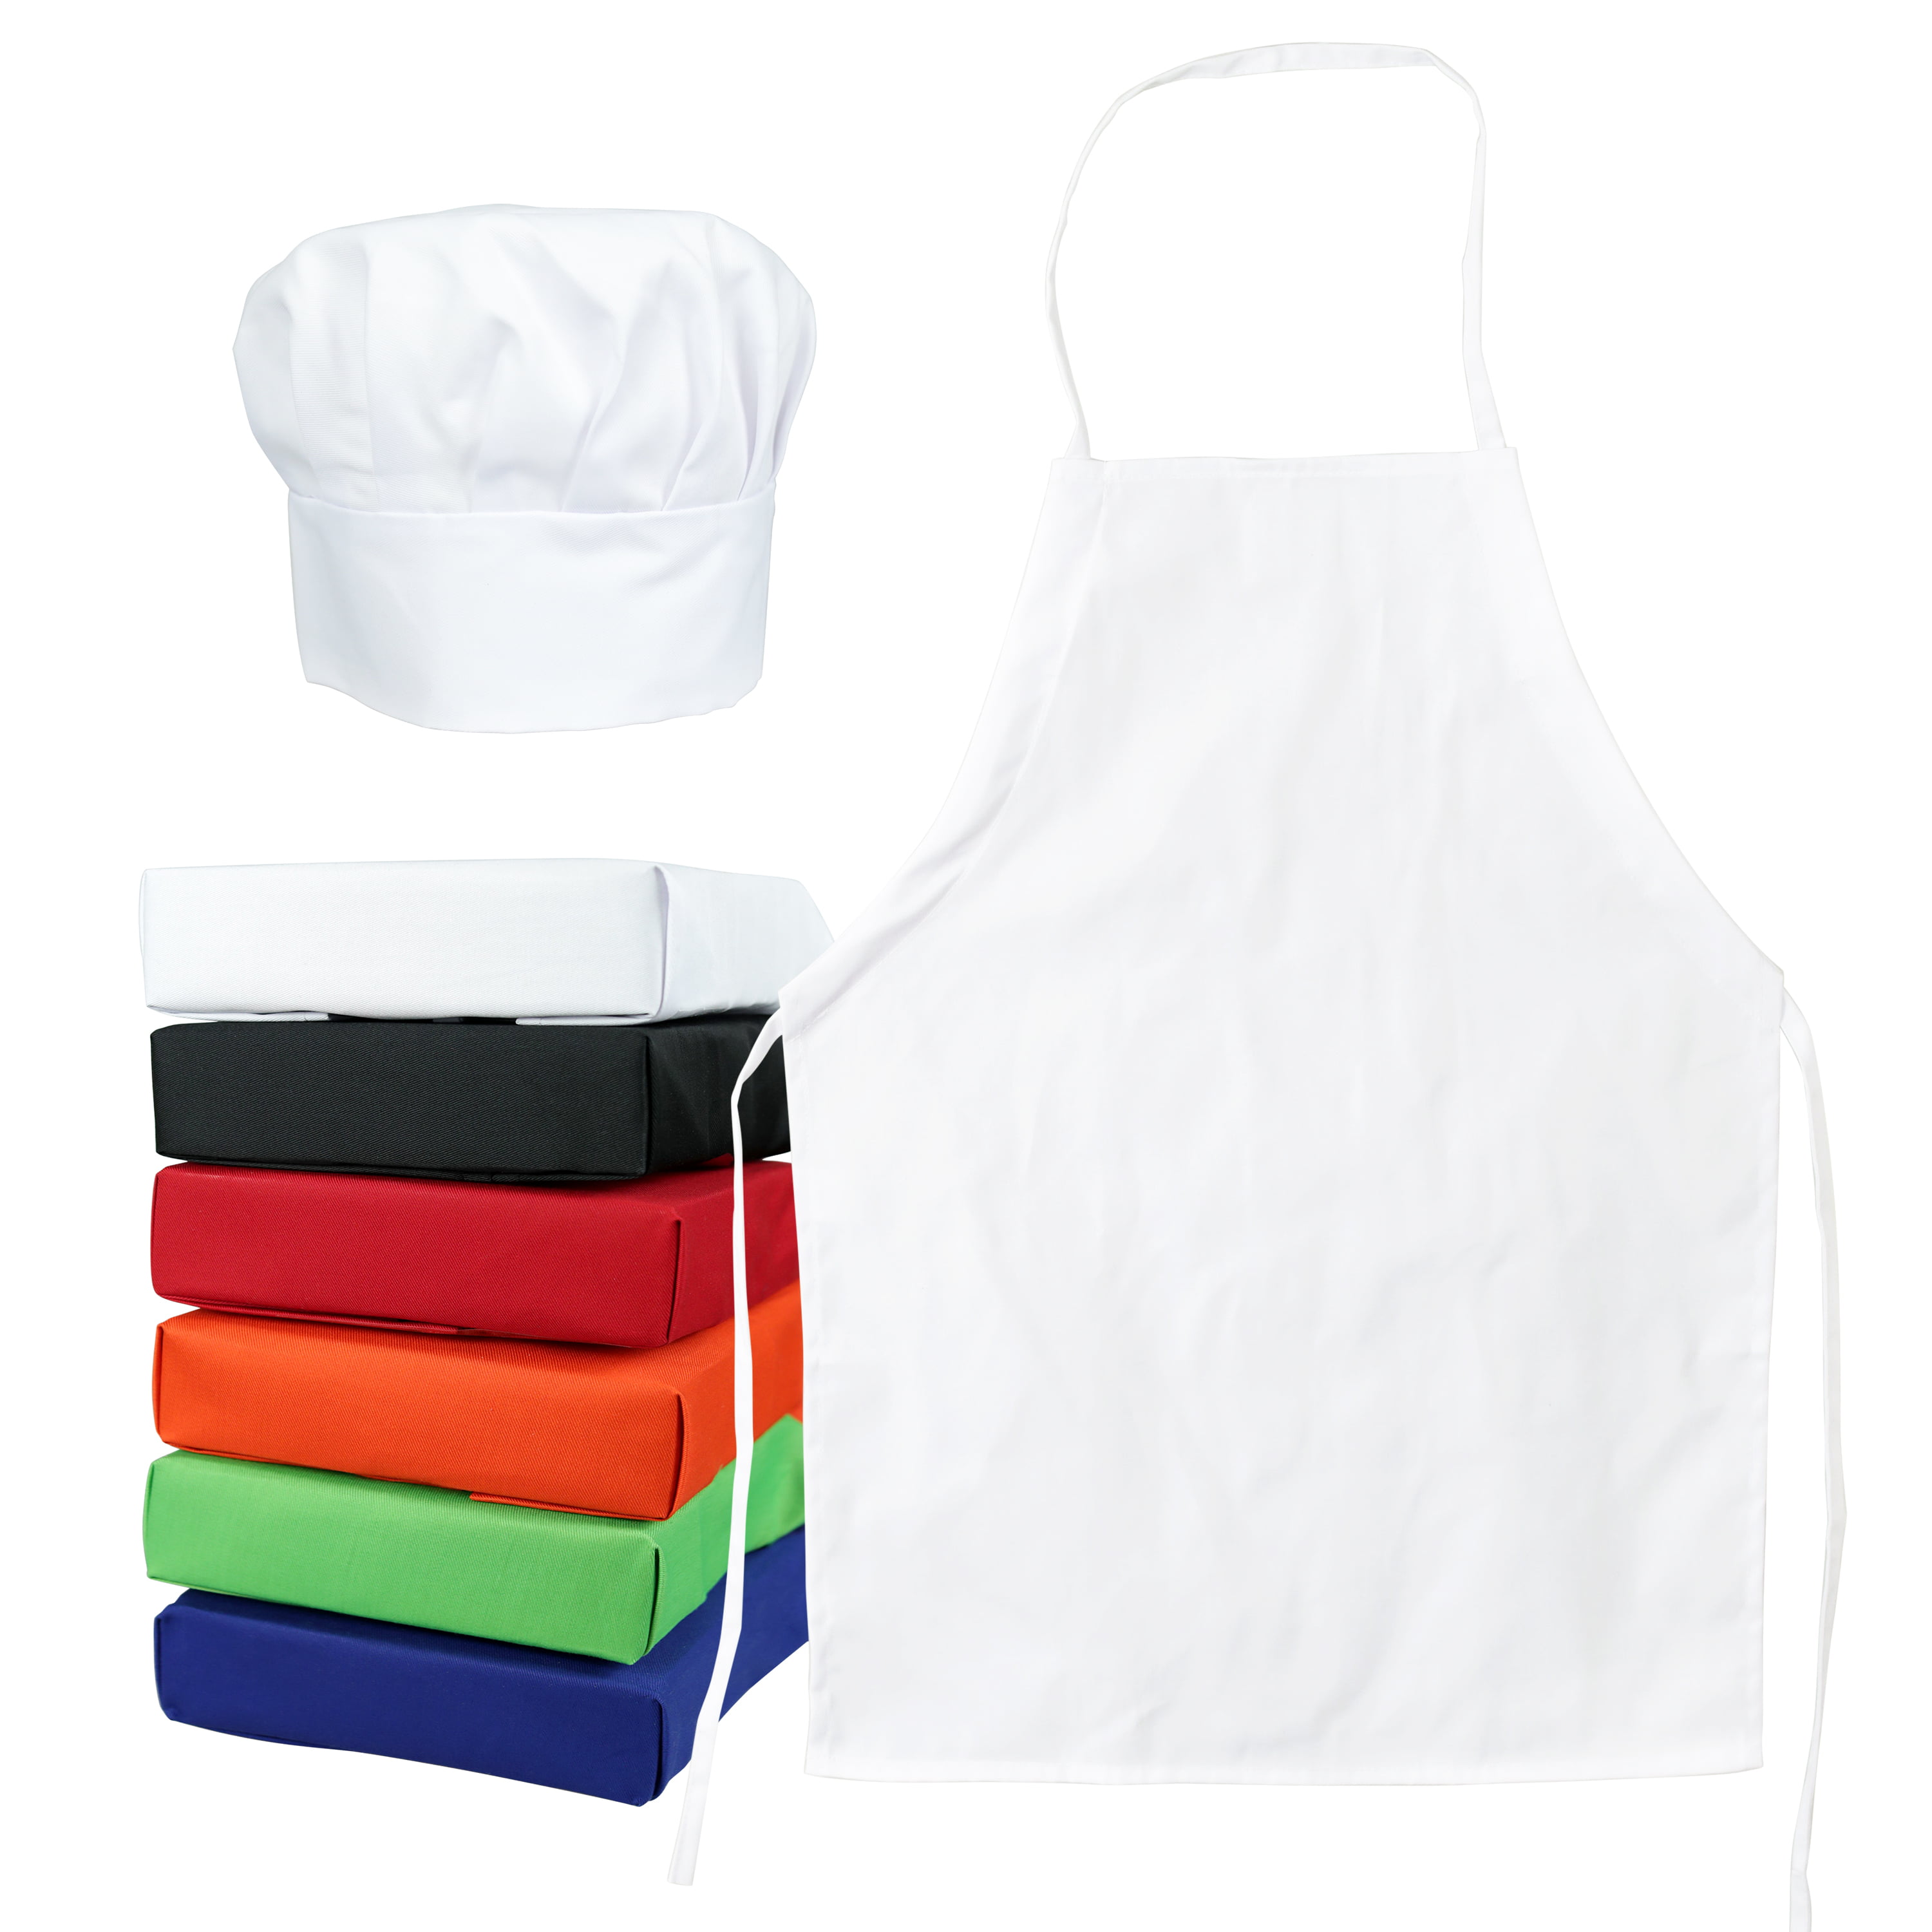 Soky Children?s Cooking and Baking Set Apron & Chef's Hat Outfit 